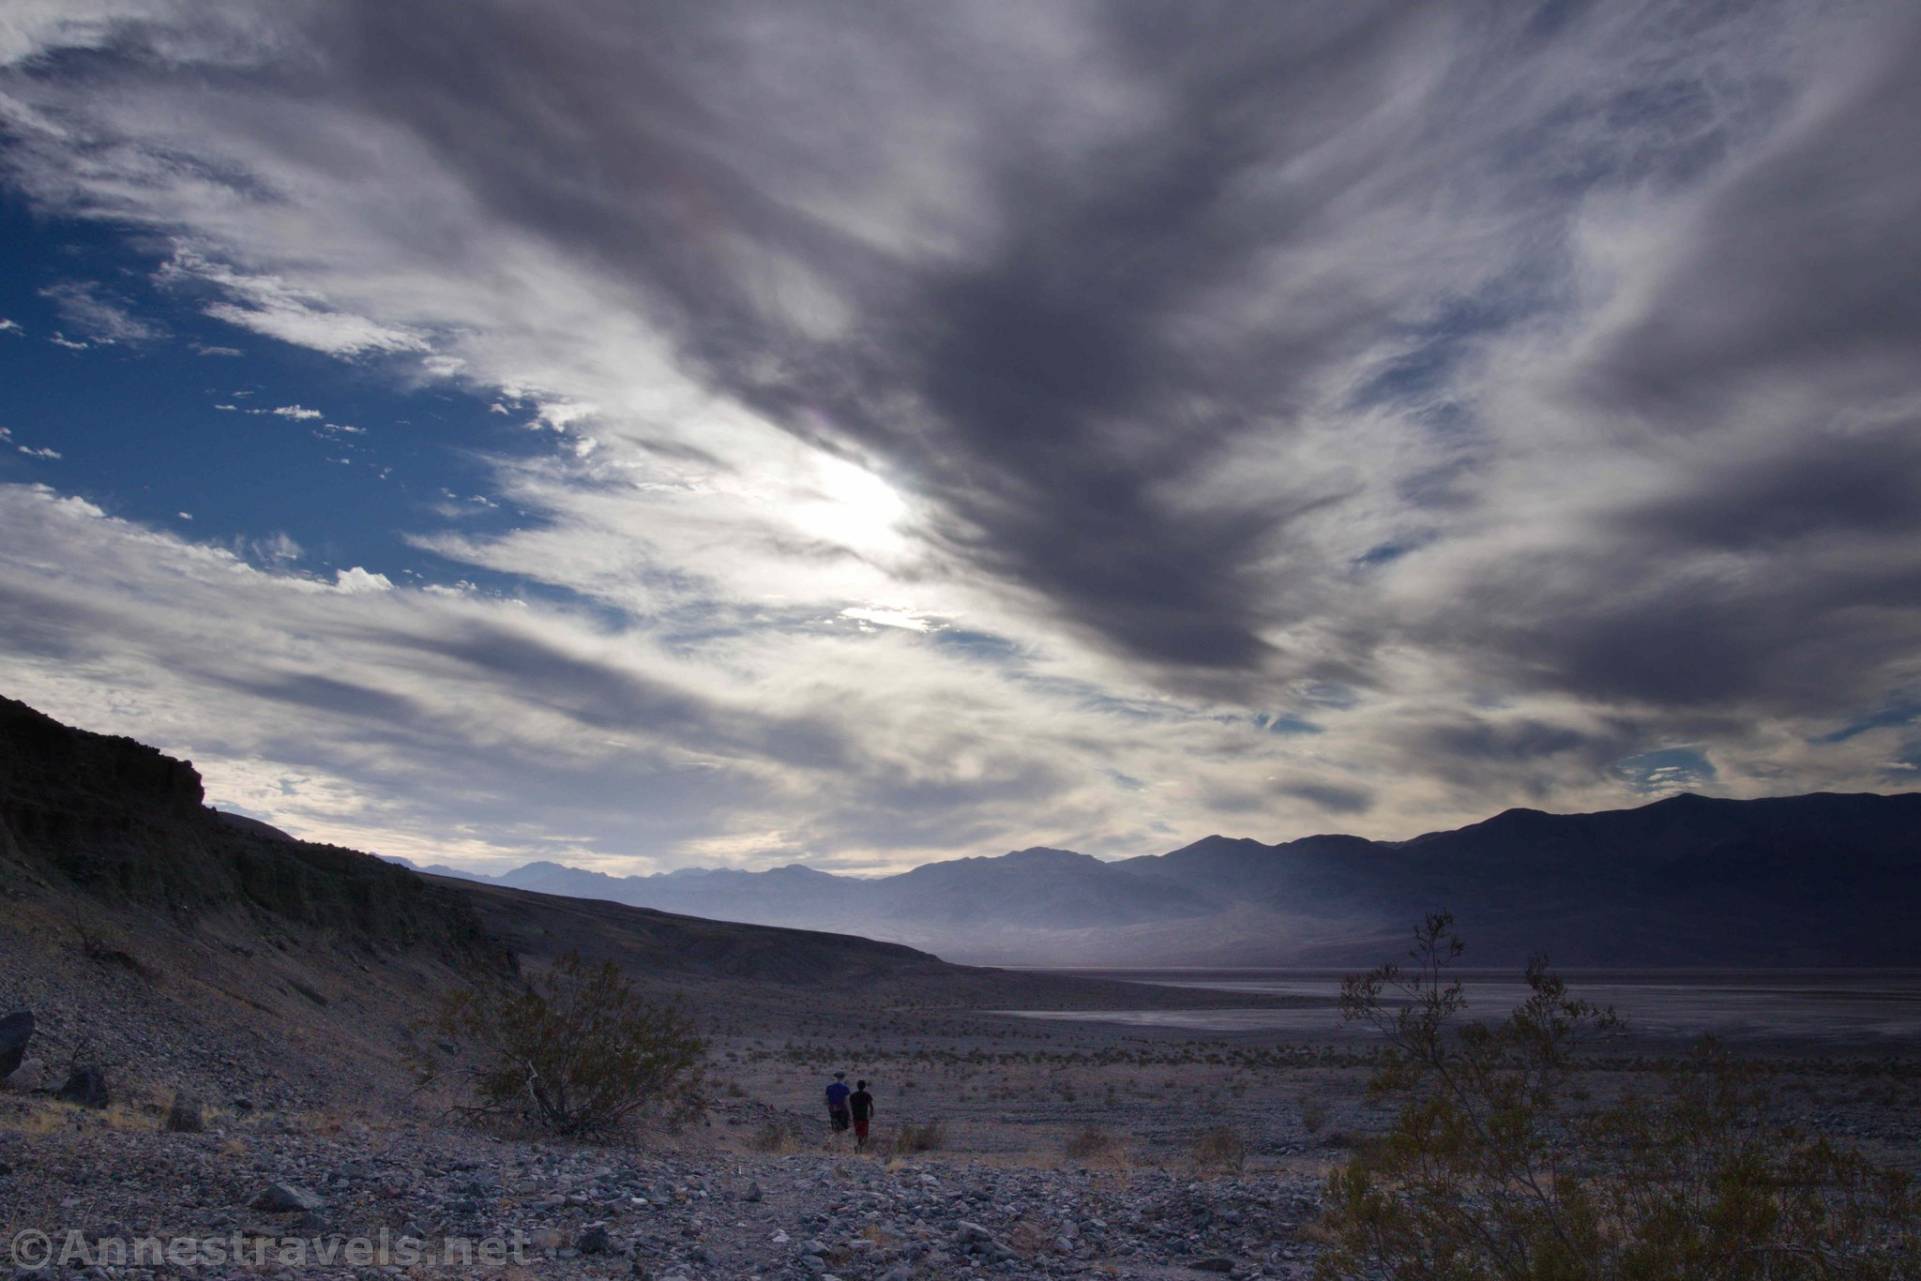 Hiking back from Willow Canyon, Death Valley National Park, California